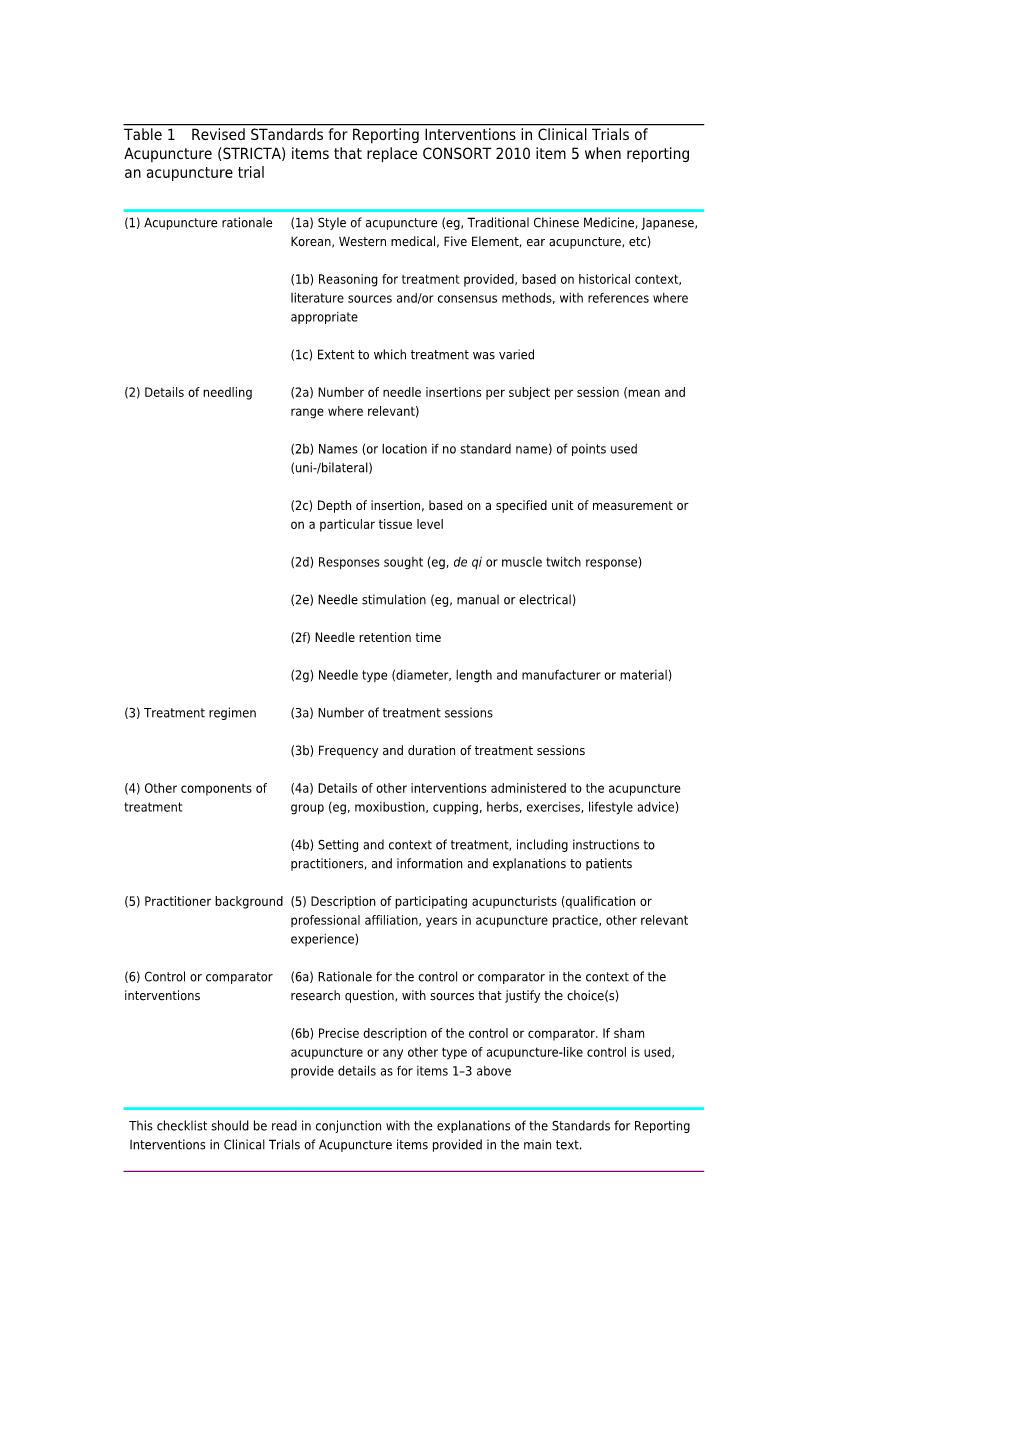 Table 1 Revised Standards for Reporting Interventions in Clinical Trials of Acupuncture